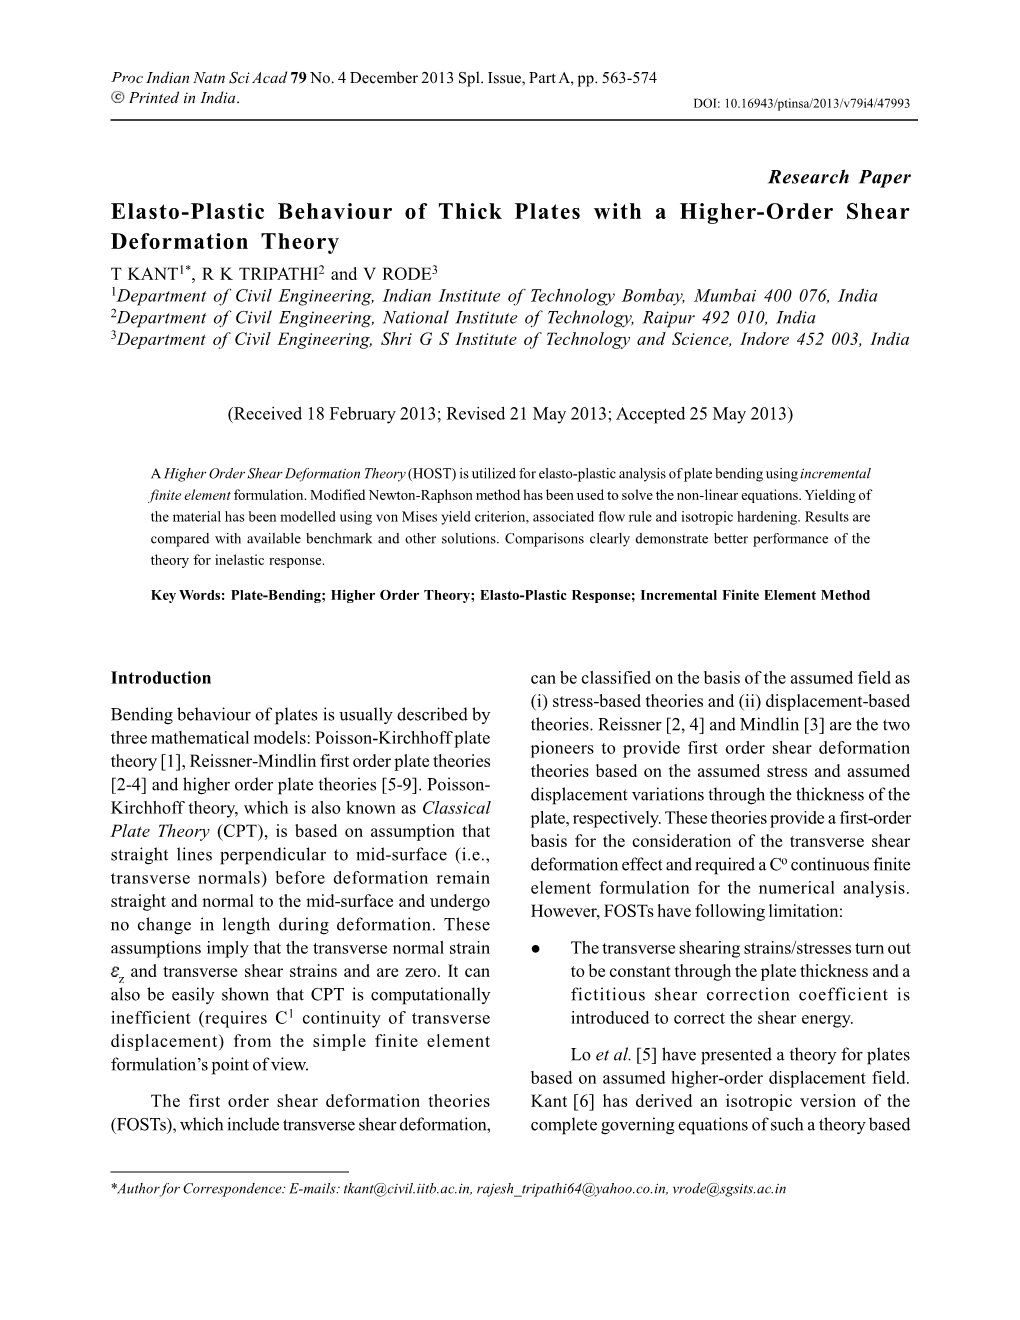 Elasto-Plastic Behaviour of Thick Plates with a Higher-Order Shear